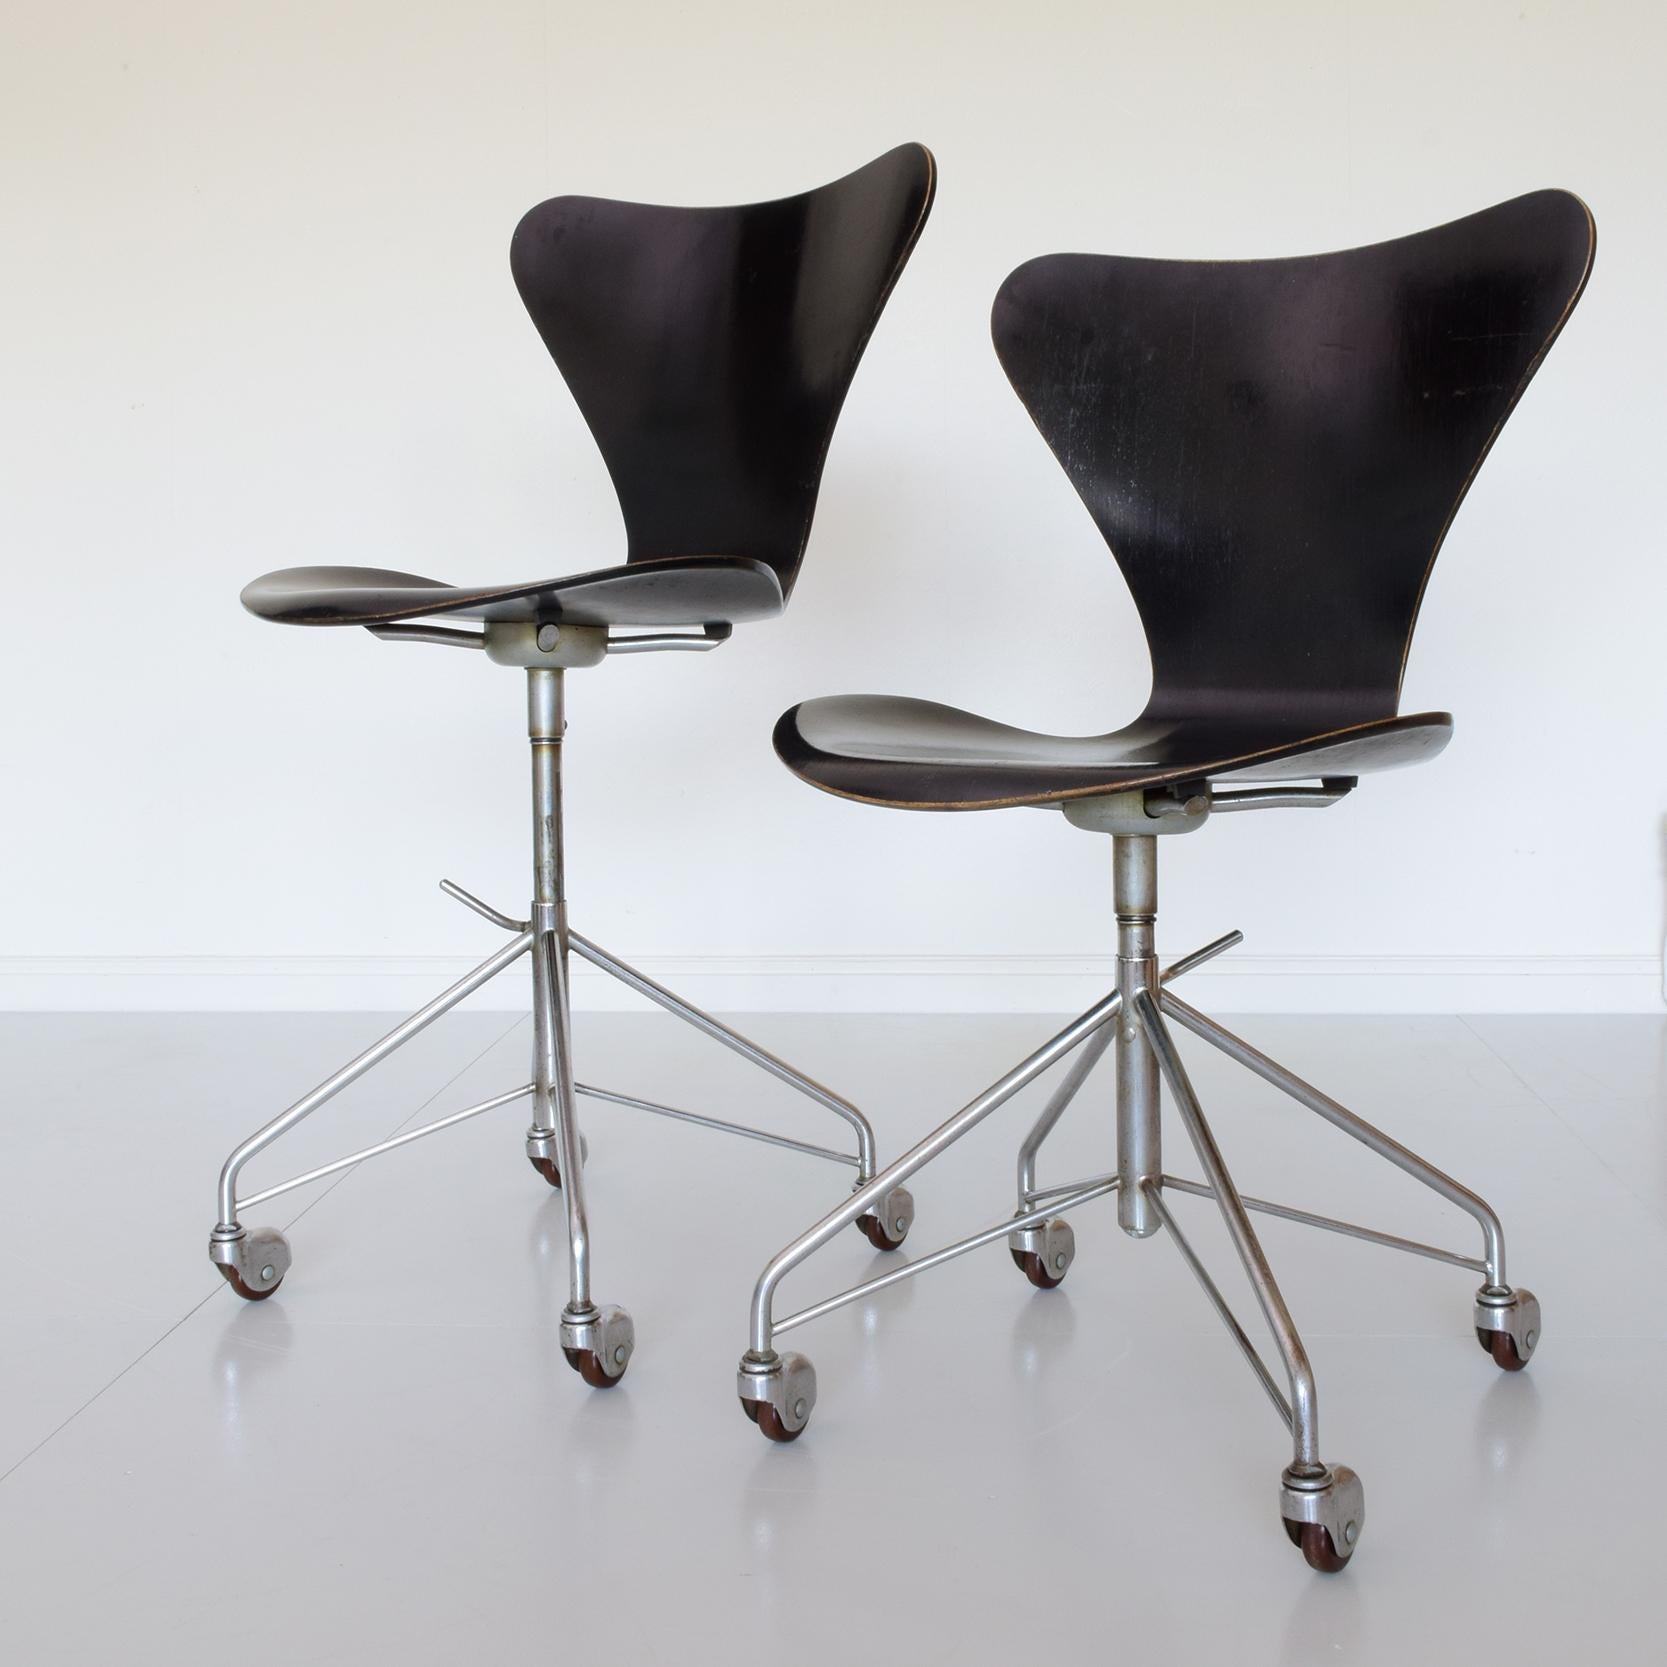 Mid-Century Modern Arne Jacobsen Model 3117 Adjustable Desk Work Chairs, 1955, Early Matching Pair For Sale